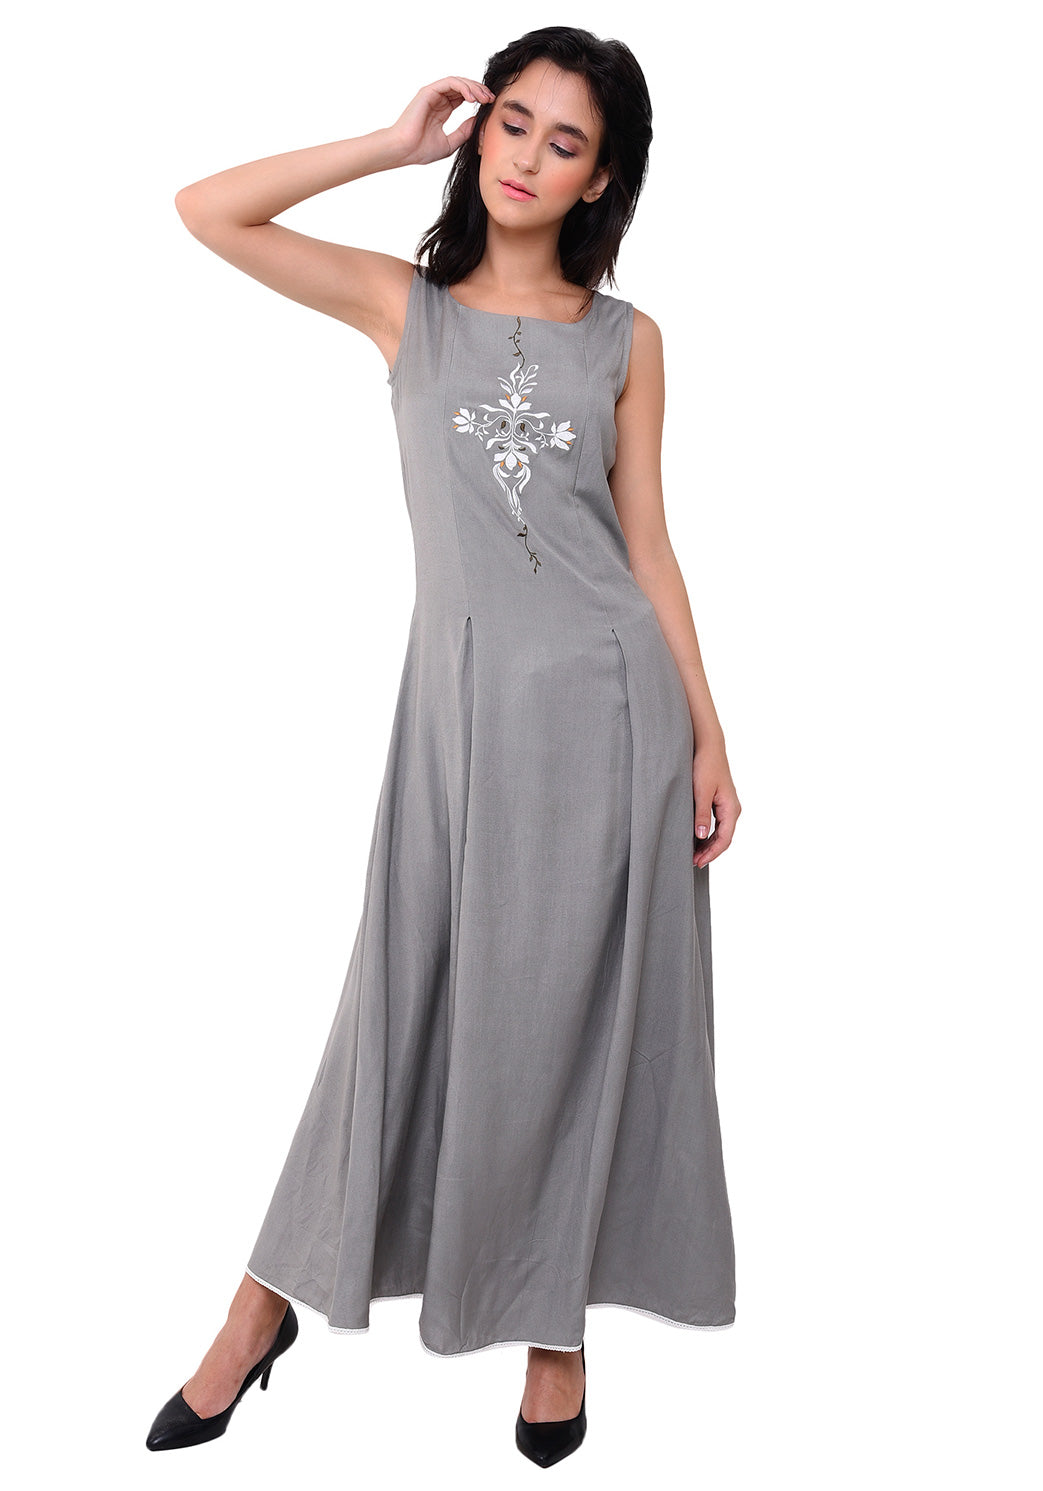 Floral Embroidered Maxi Dress - Grey